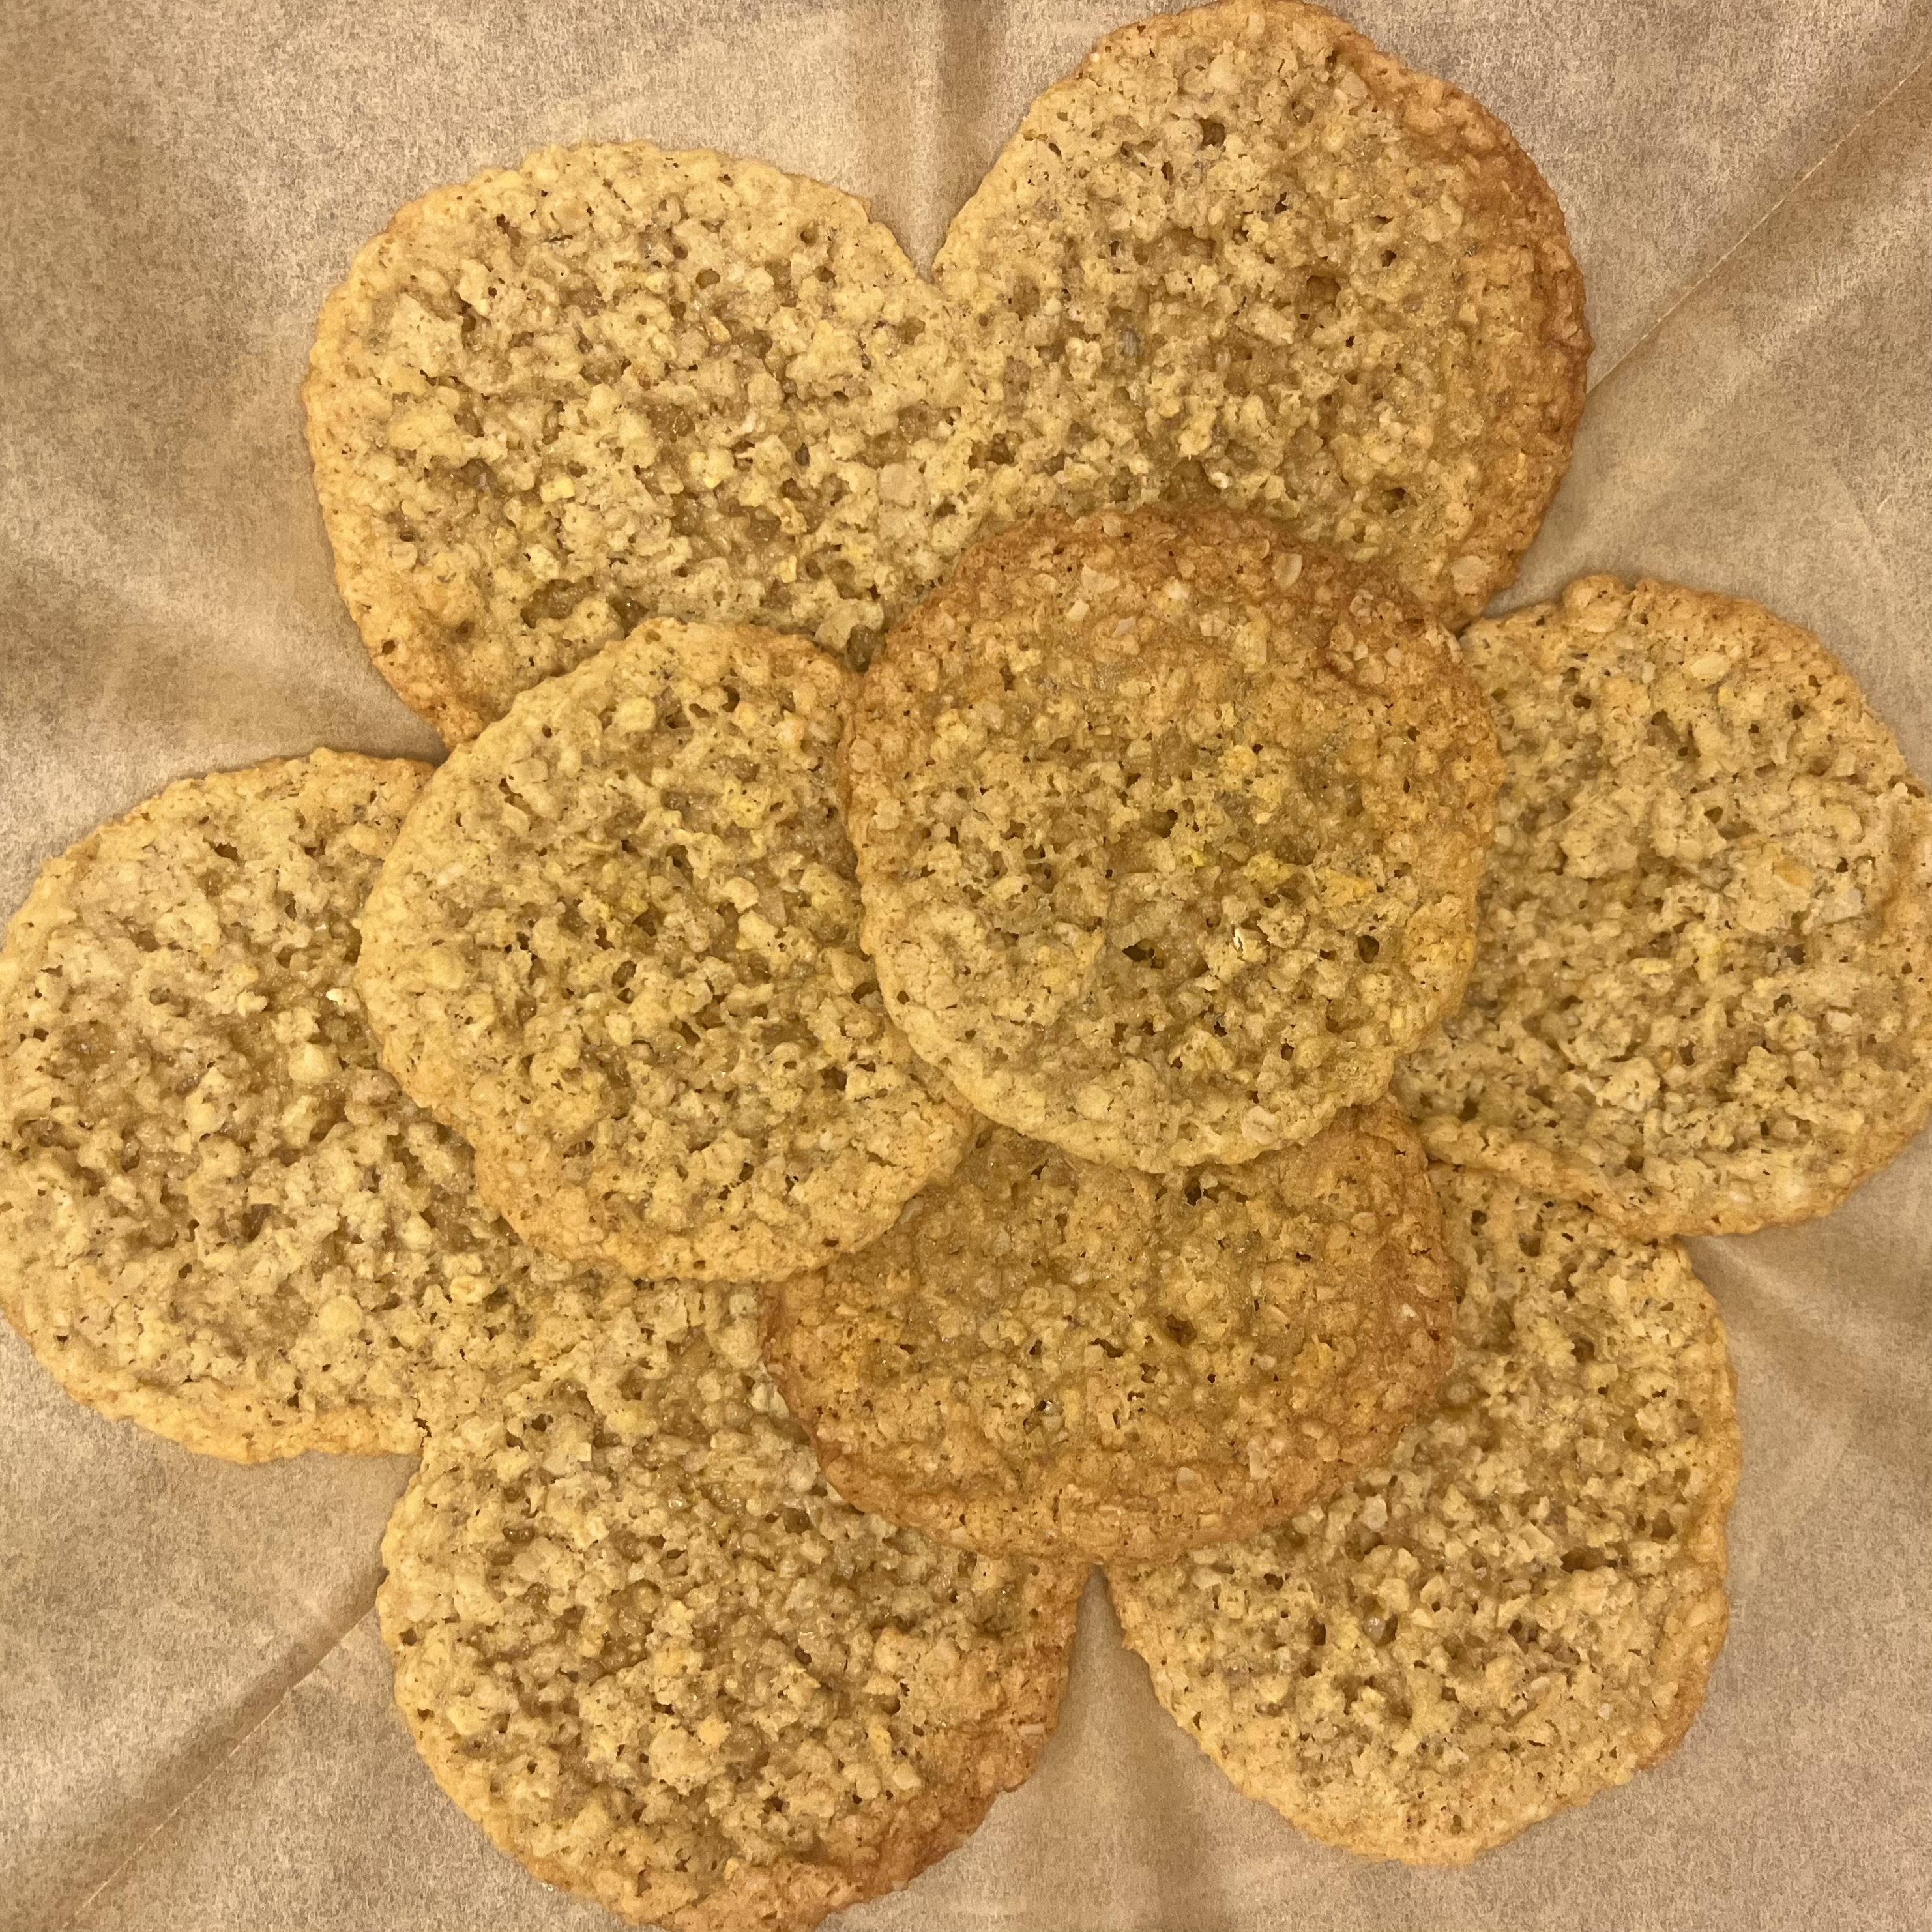 Example of cookies made from Honey Bunny Oatmeal Cookie Mix